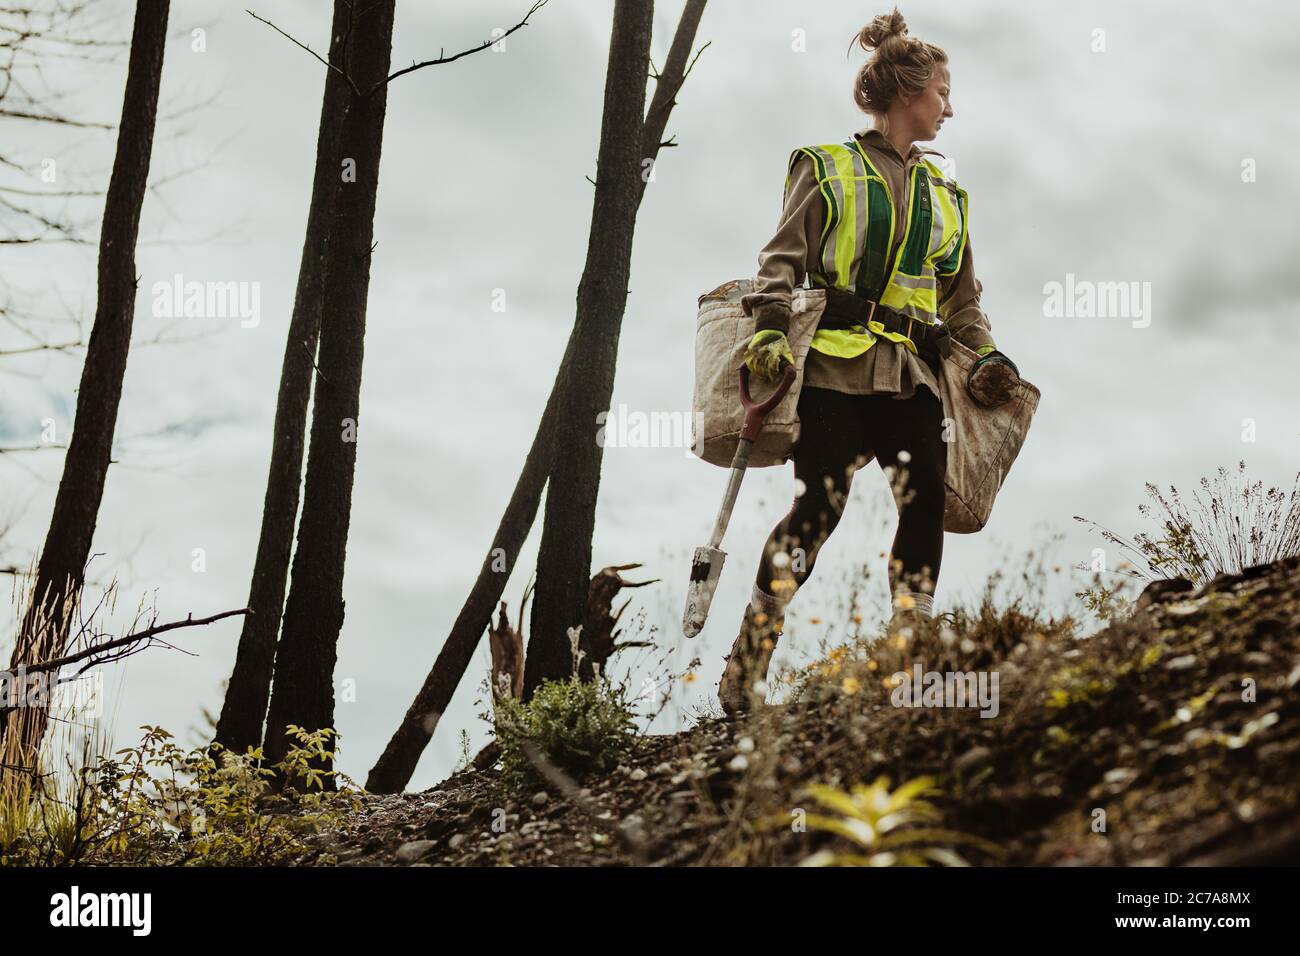 Female planting trees in forest. Woman tree planter wearing reflective vest walking in forest carrying bag full of trees and a shovel. Stock Photo